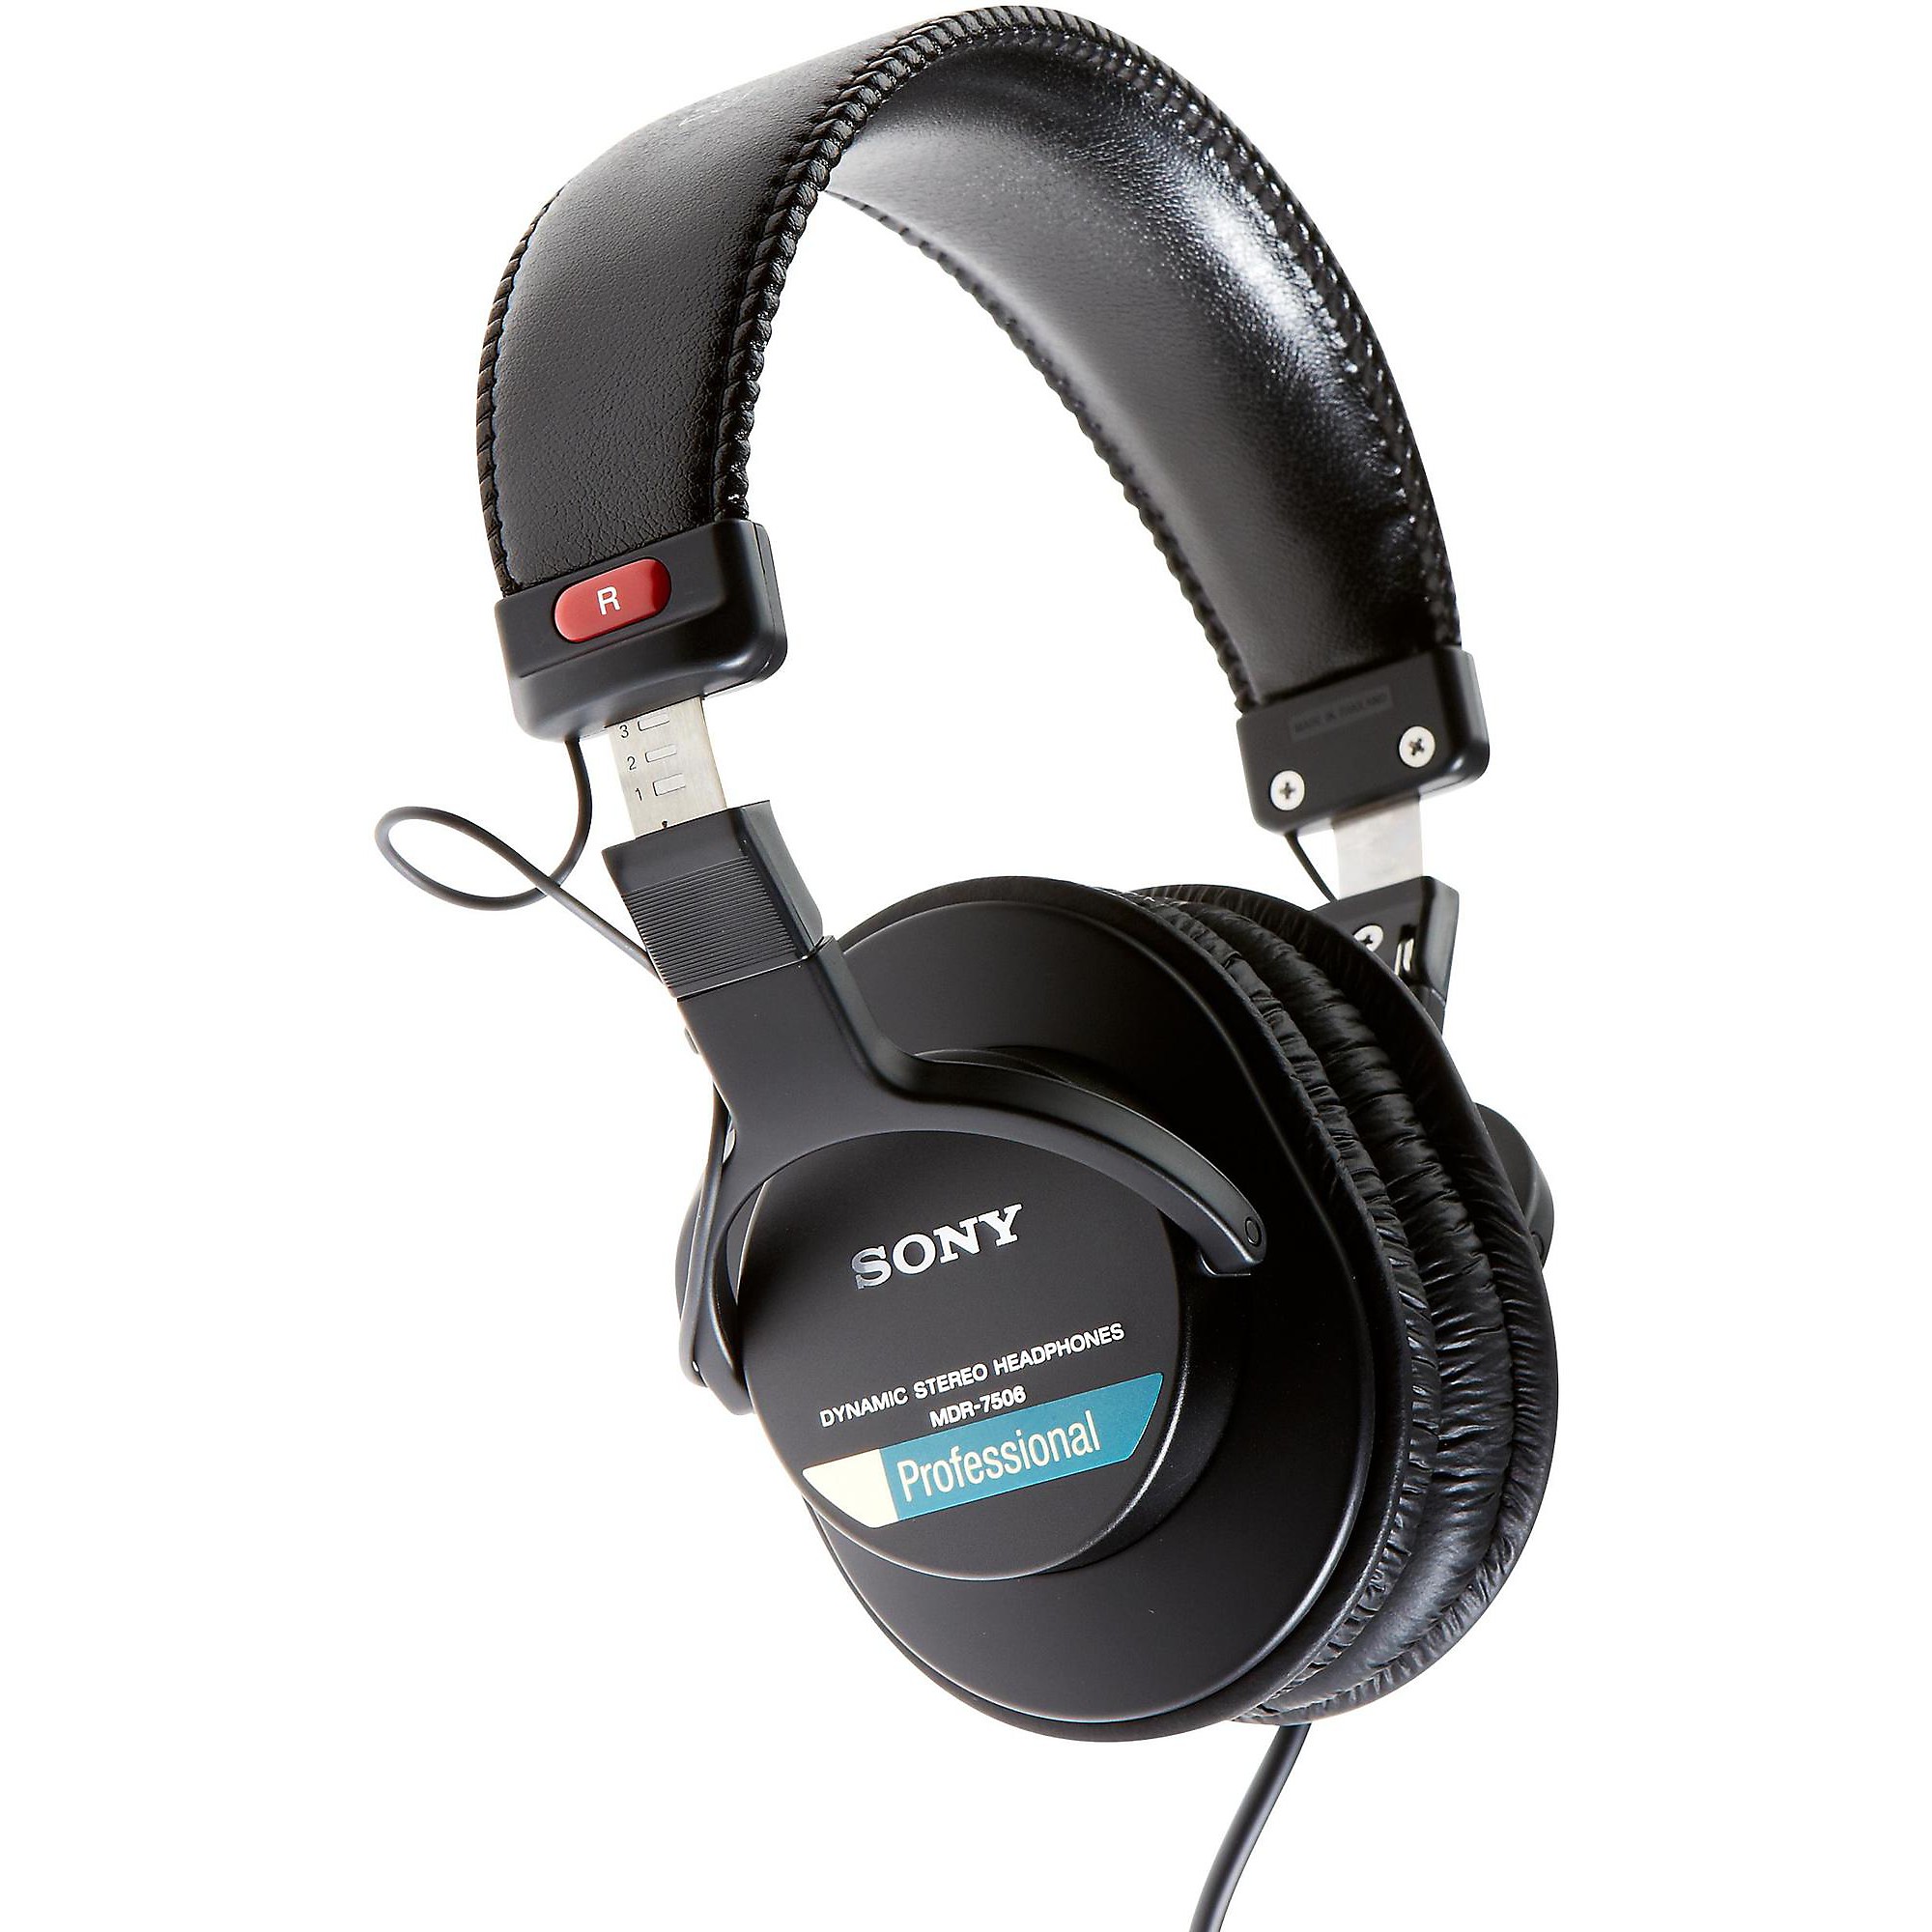 Sony Sony MDR-7506 Professional Closed-Back Headphones